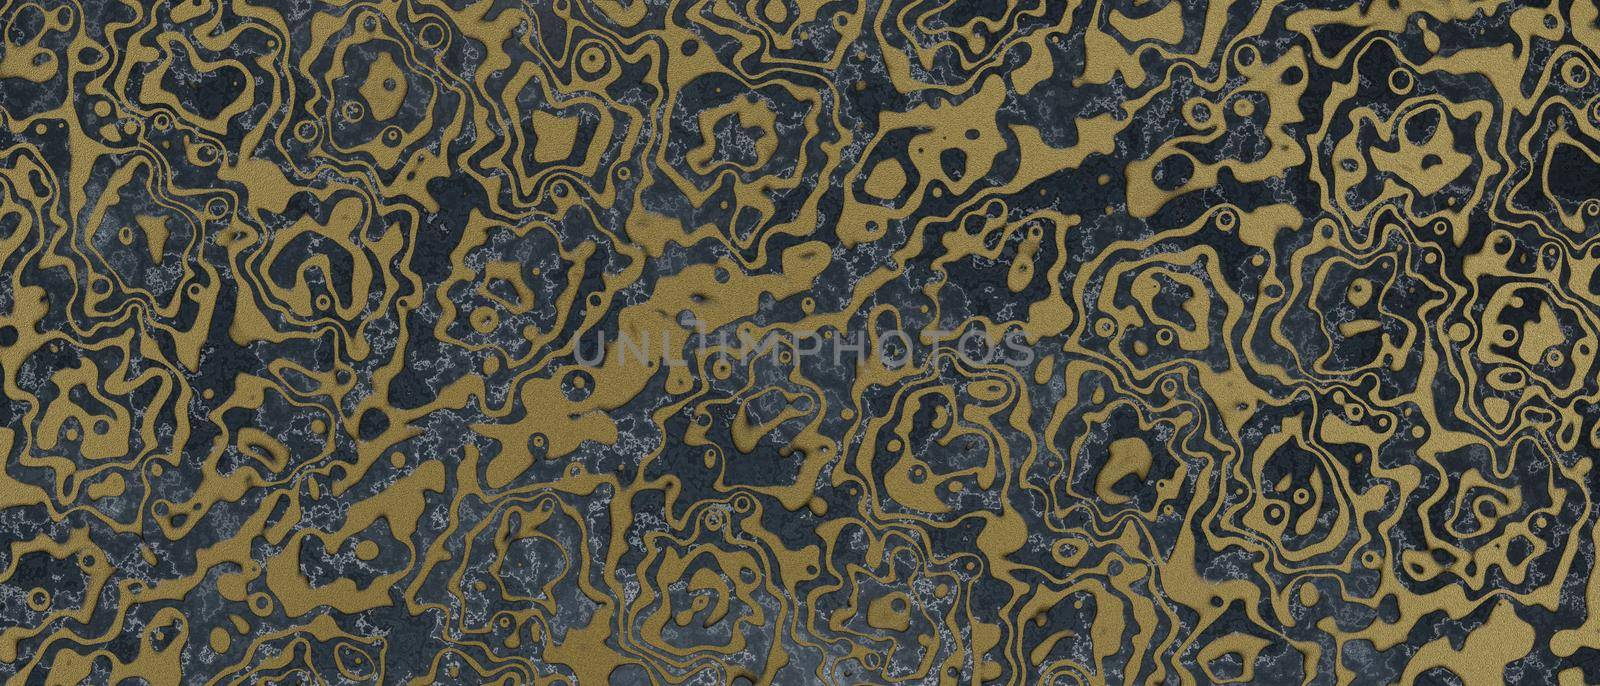 creative gold veins on black marble background